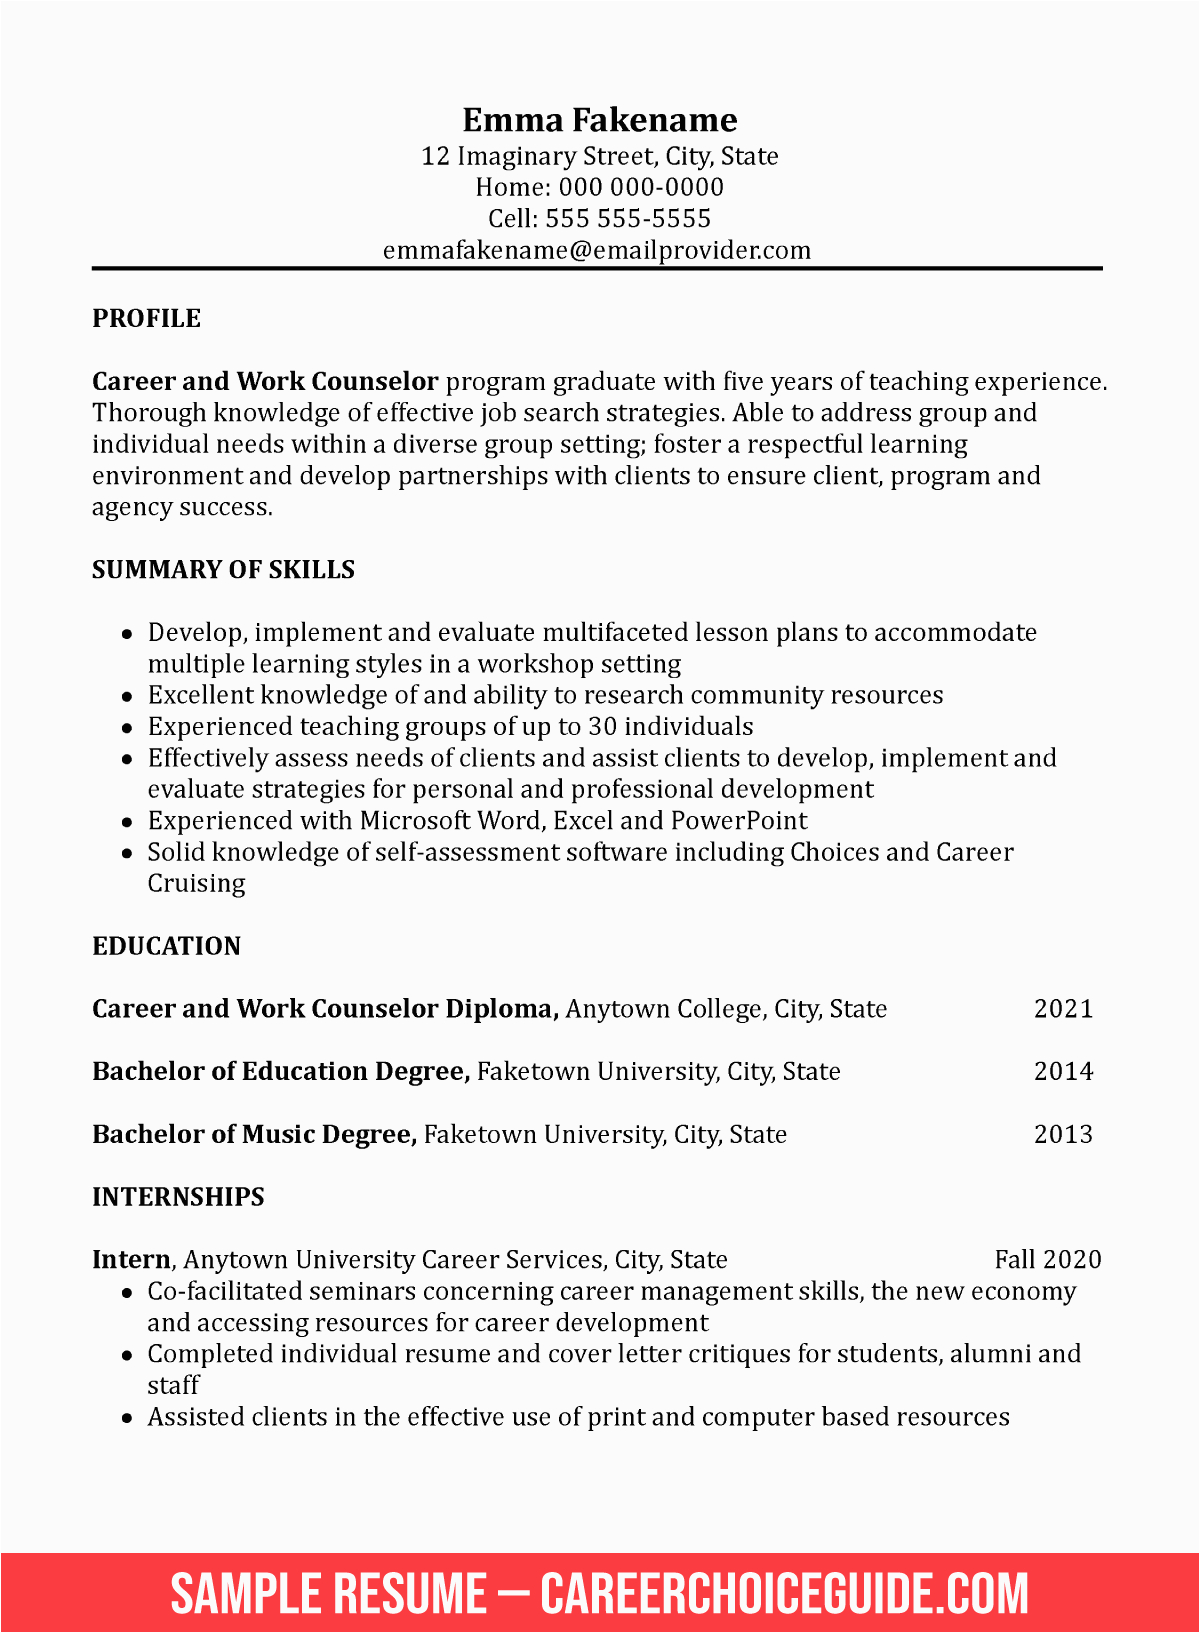 Career Change From Corporate to Teaching Resume Sample Career Change Resume Sample and Tips